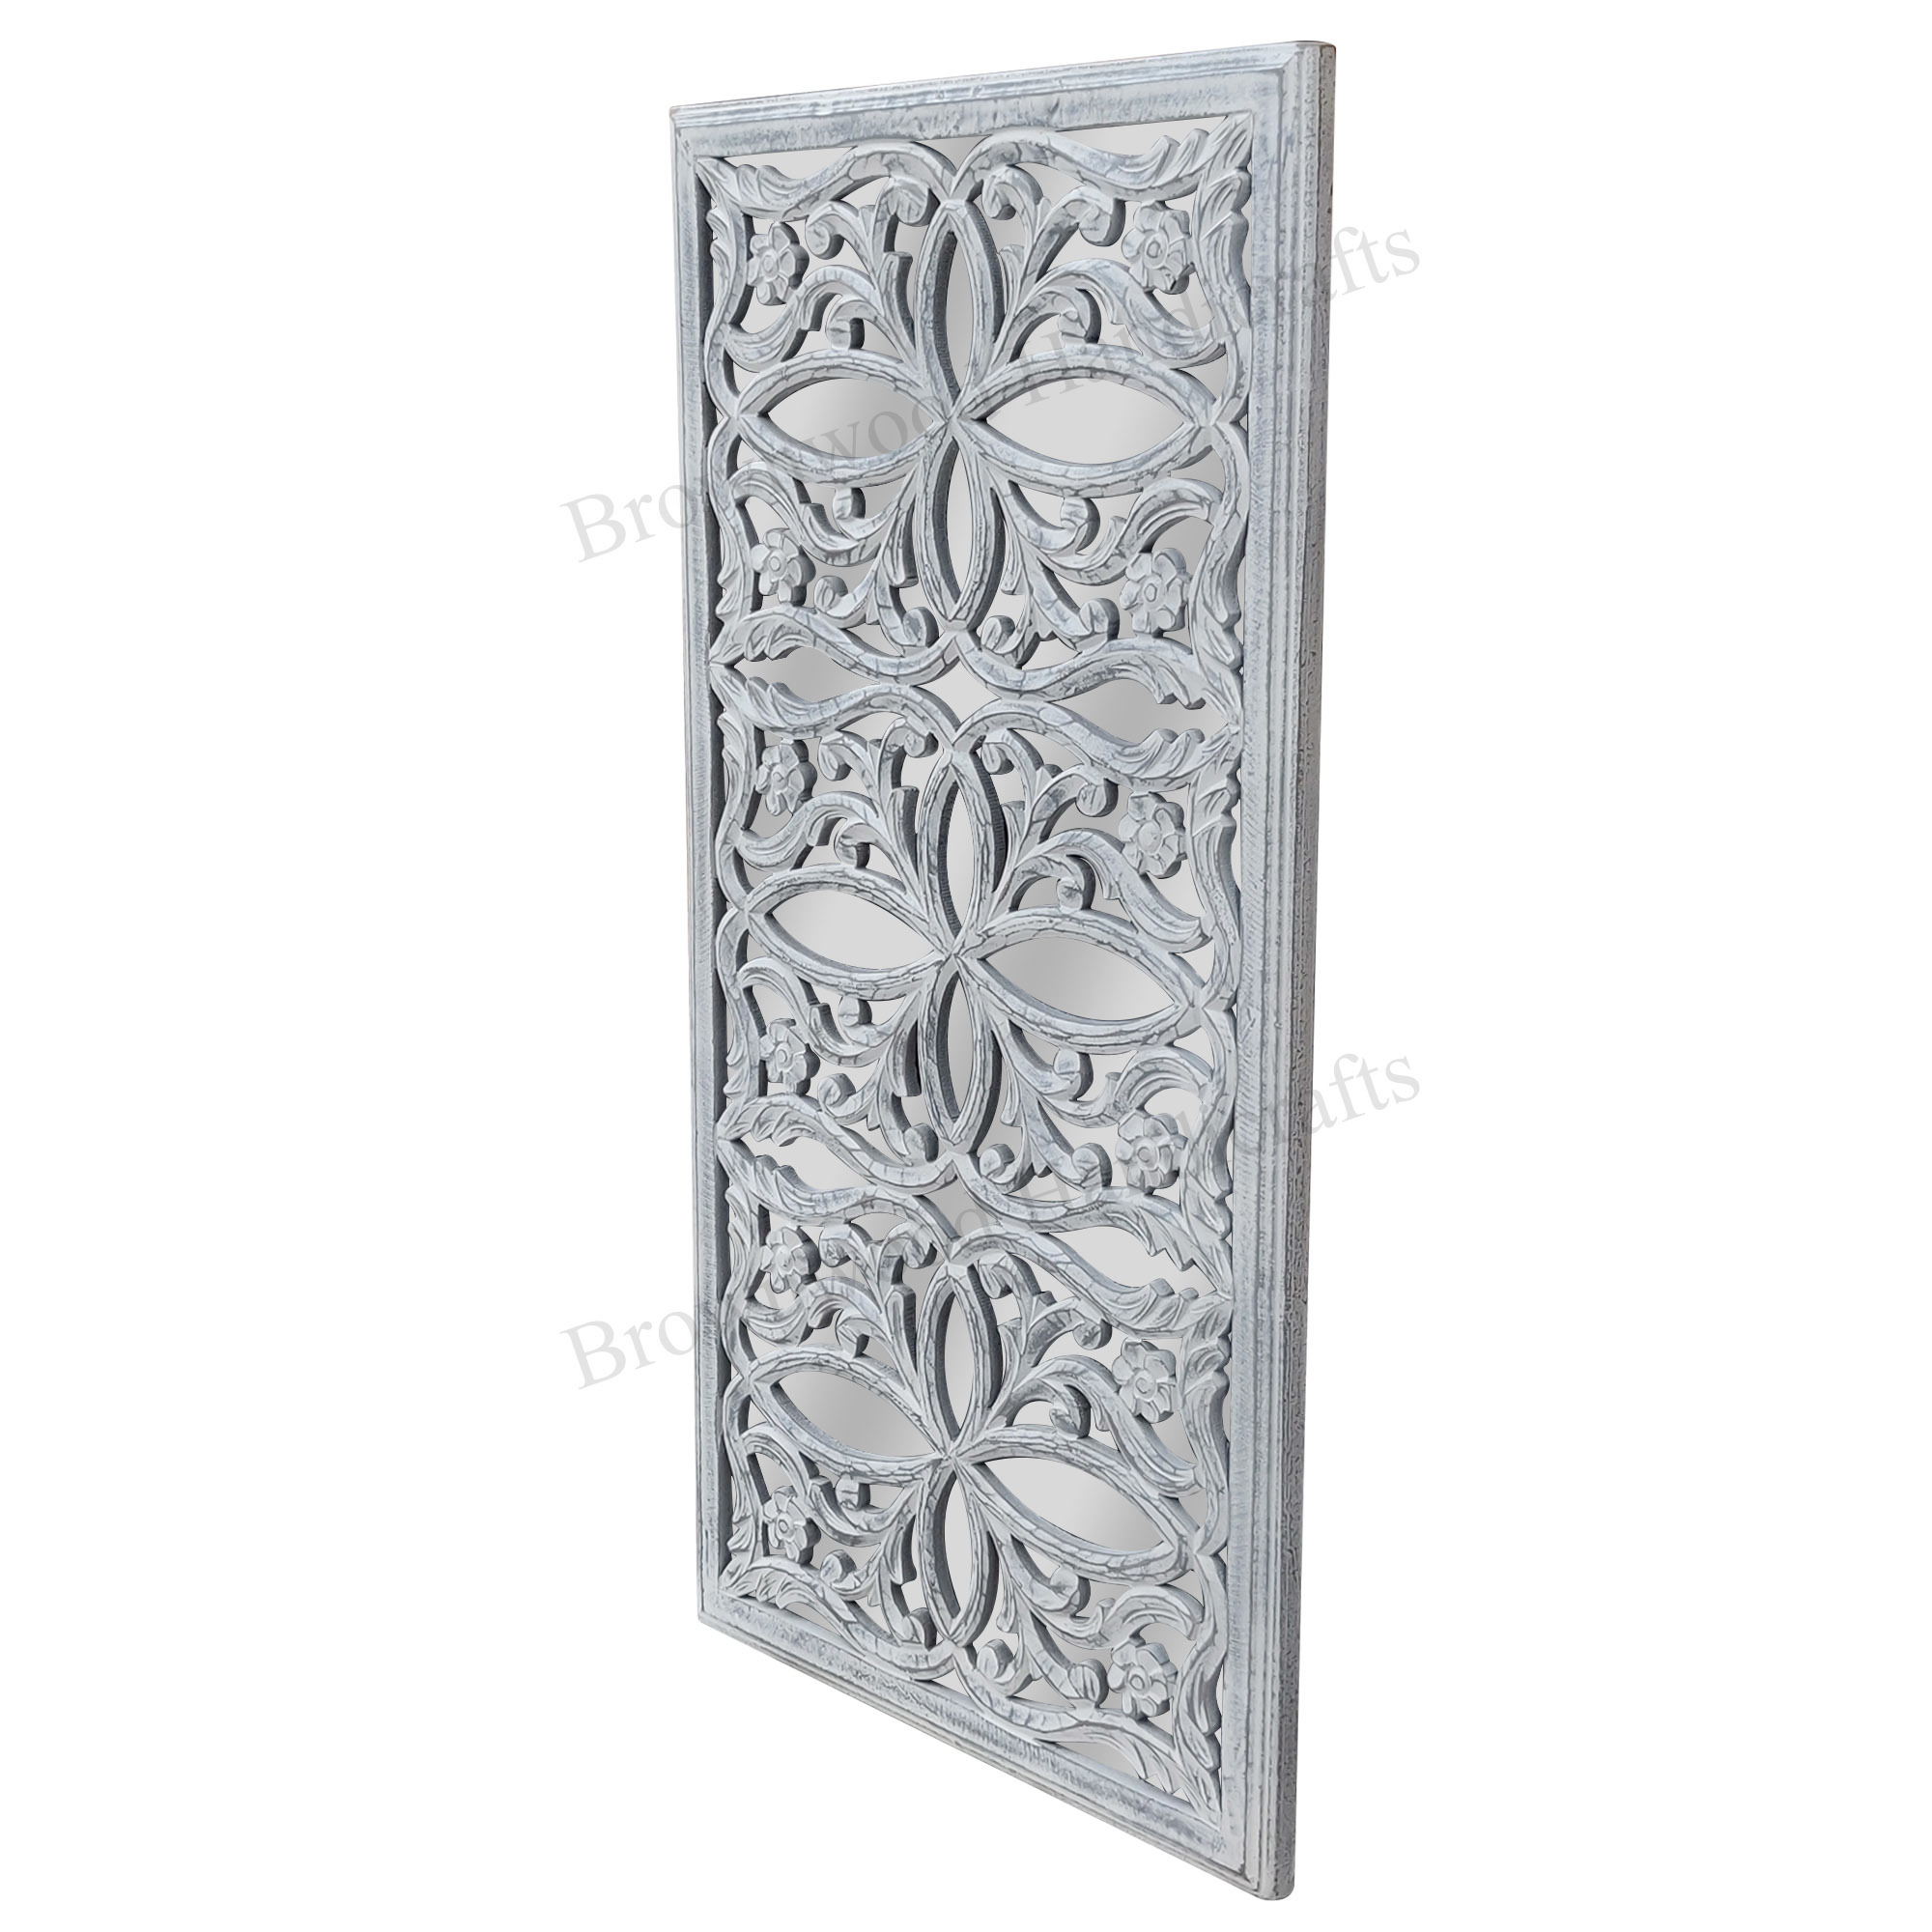 MDF Wood Carved Wall Mirror Panel